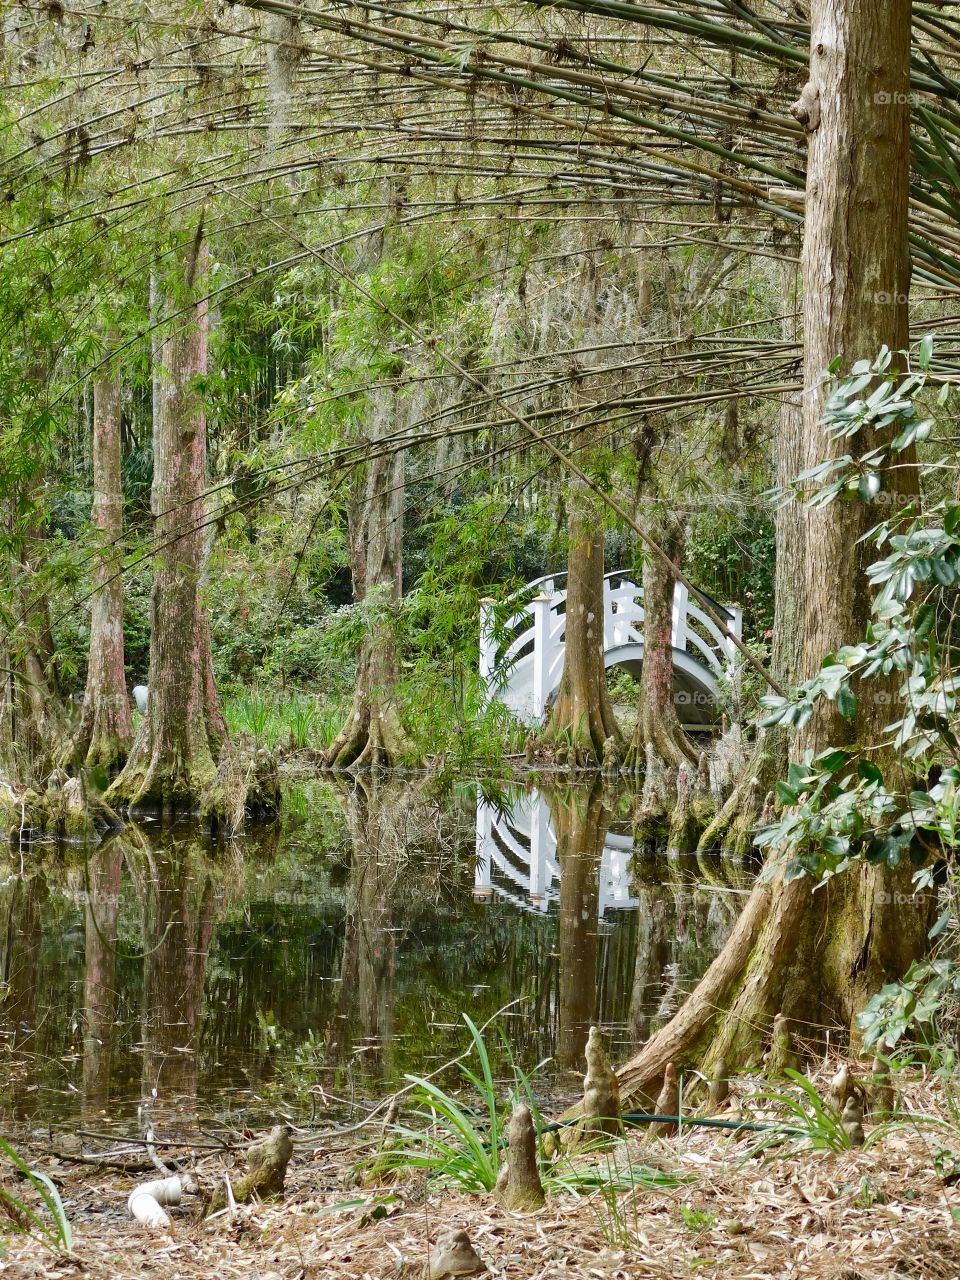 Cypress and Footbridge. One of many bridges scattered through the grounds at Magnolia Plantation.